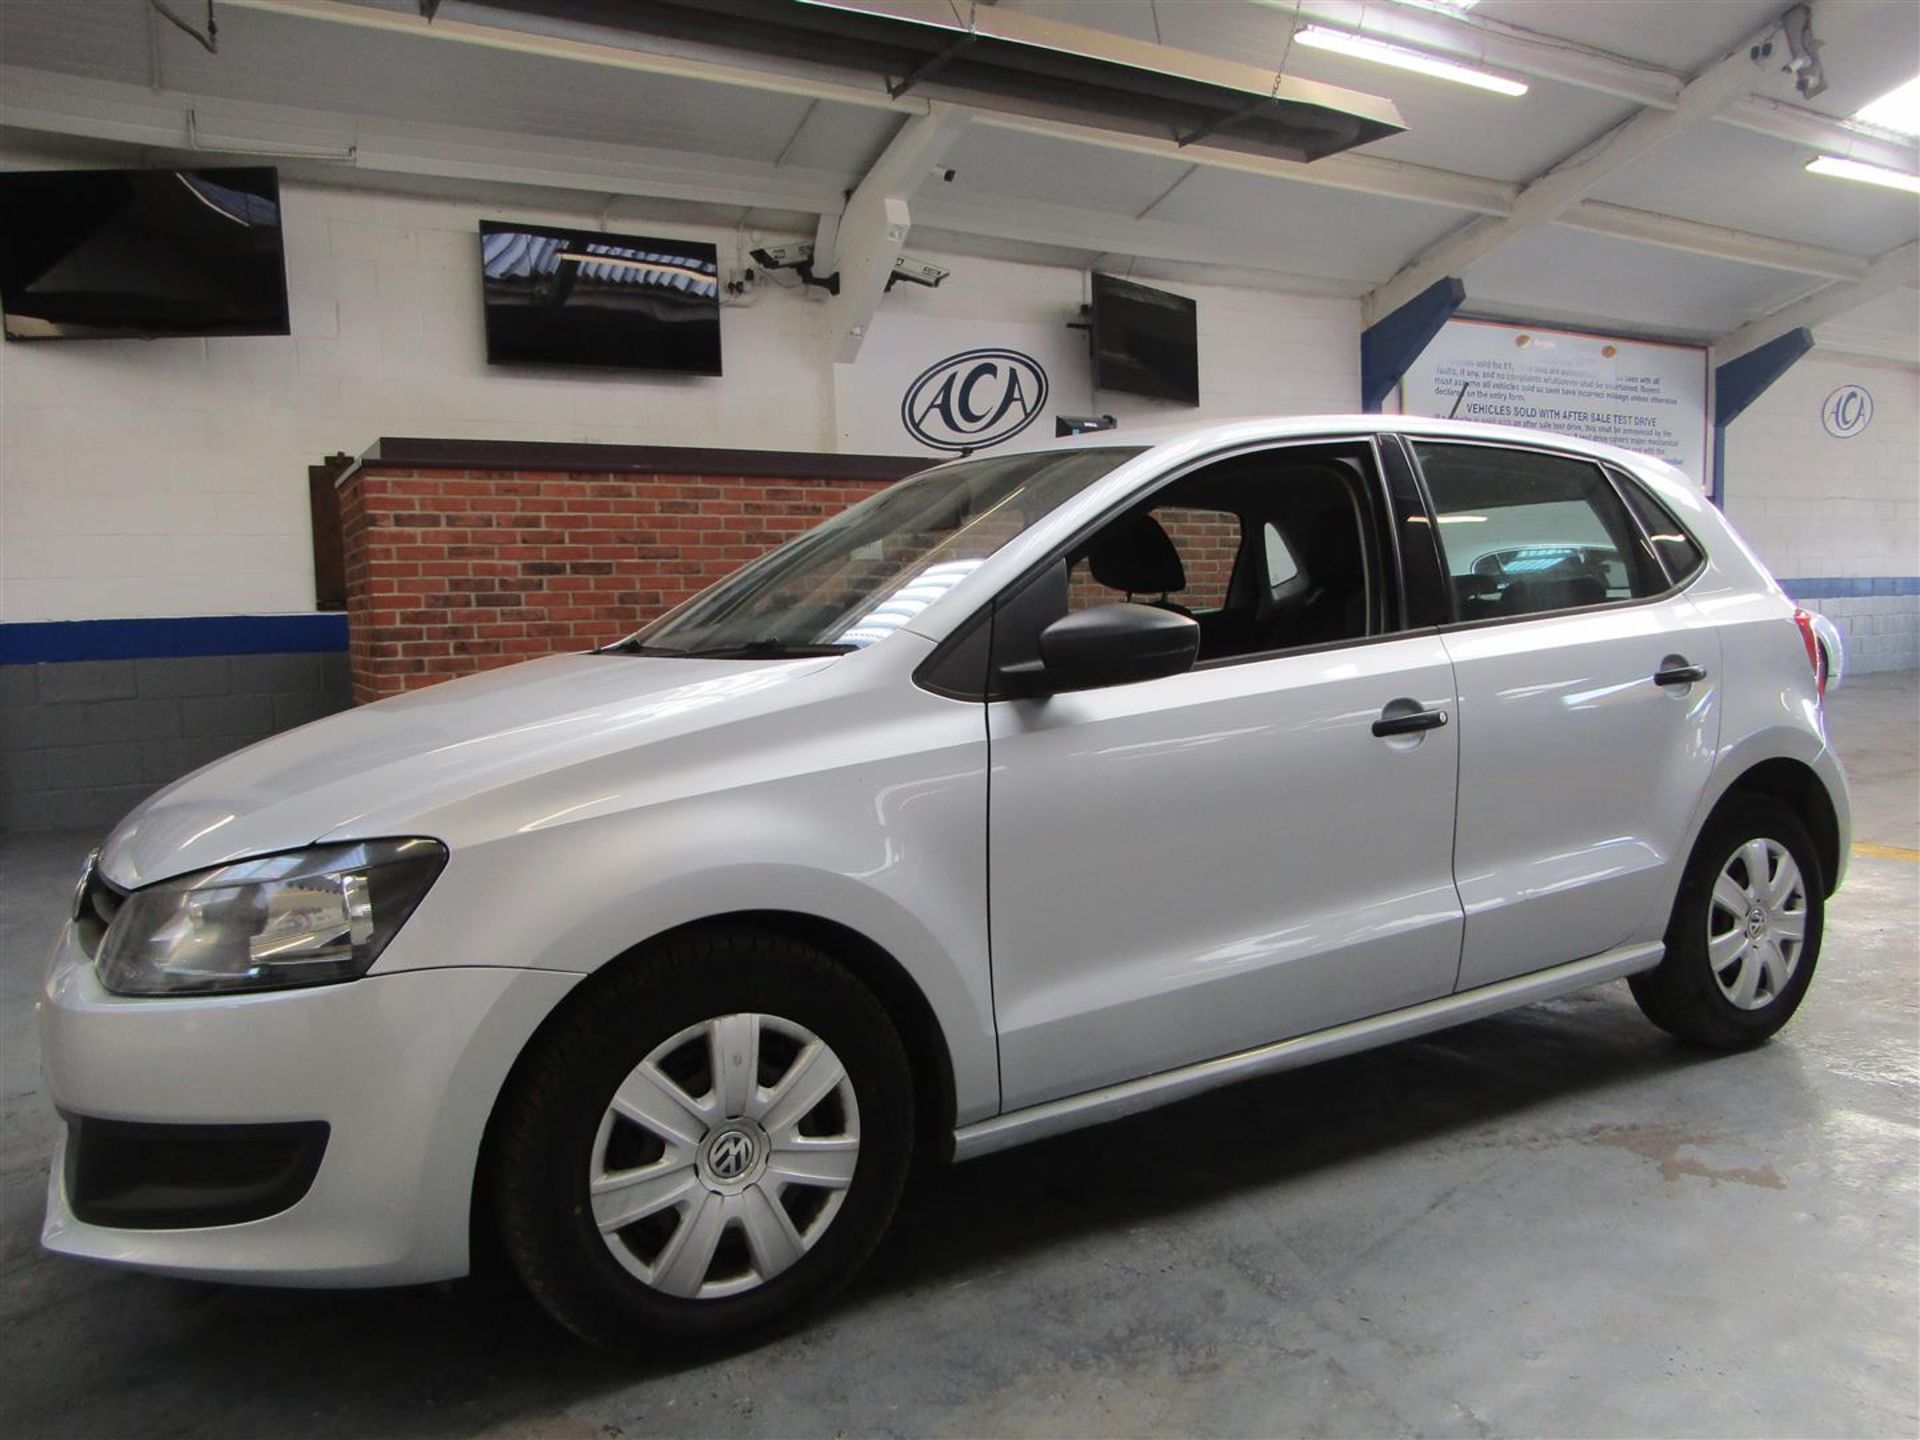 59 10 VW Polo S 60 - Image 2 of 29